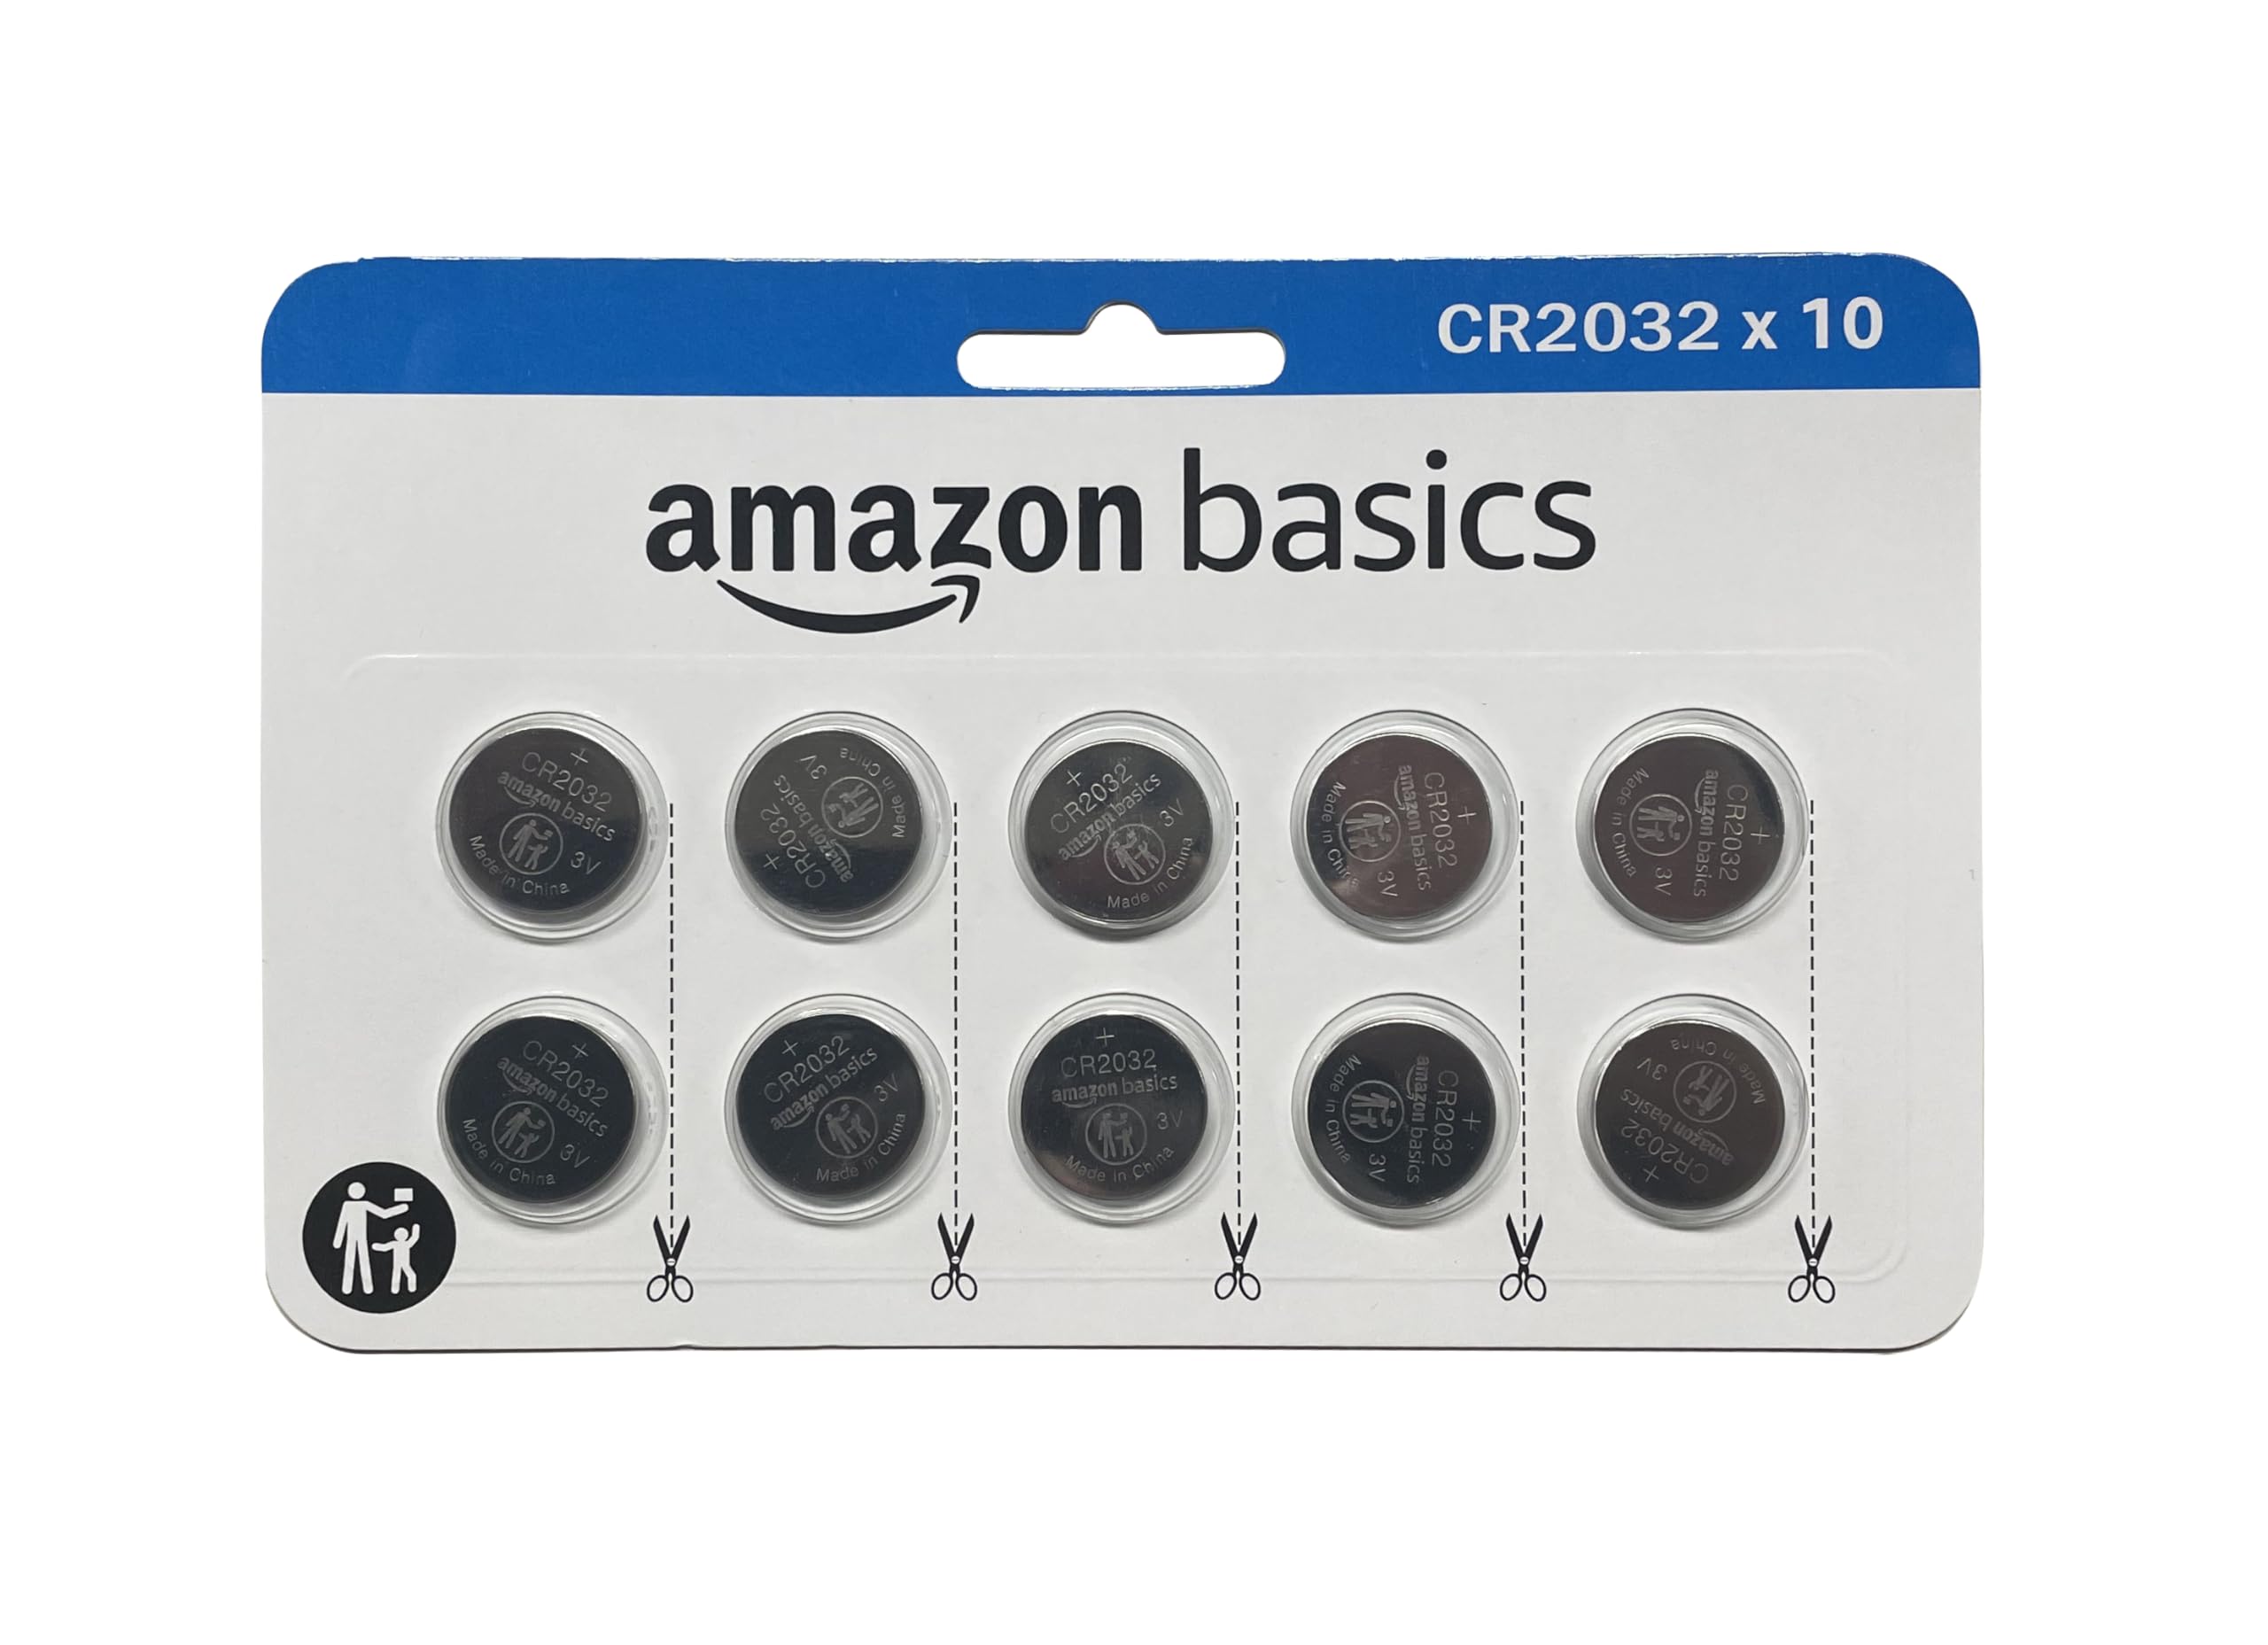 10-Count Amazon Basics 3V CR2032 Lithium Coin Cell Battery $7.46 ($0.75 each) + Free Shipping w/ Prime or on $35+